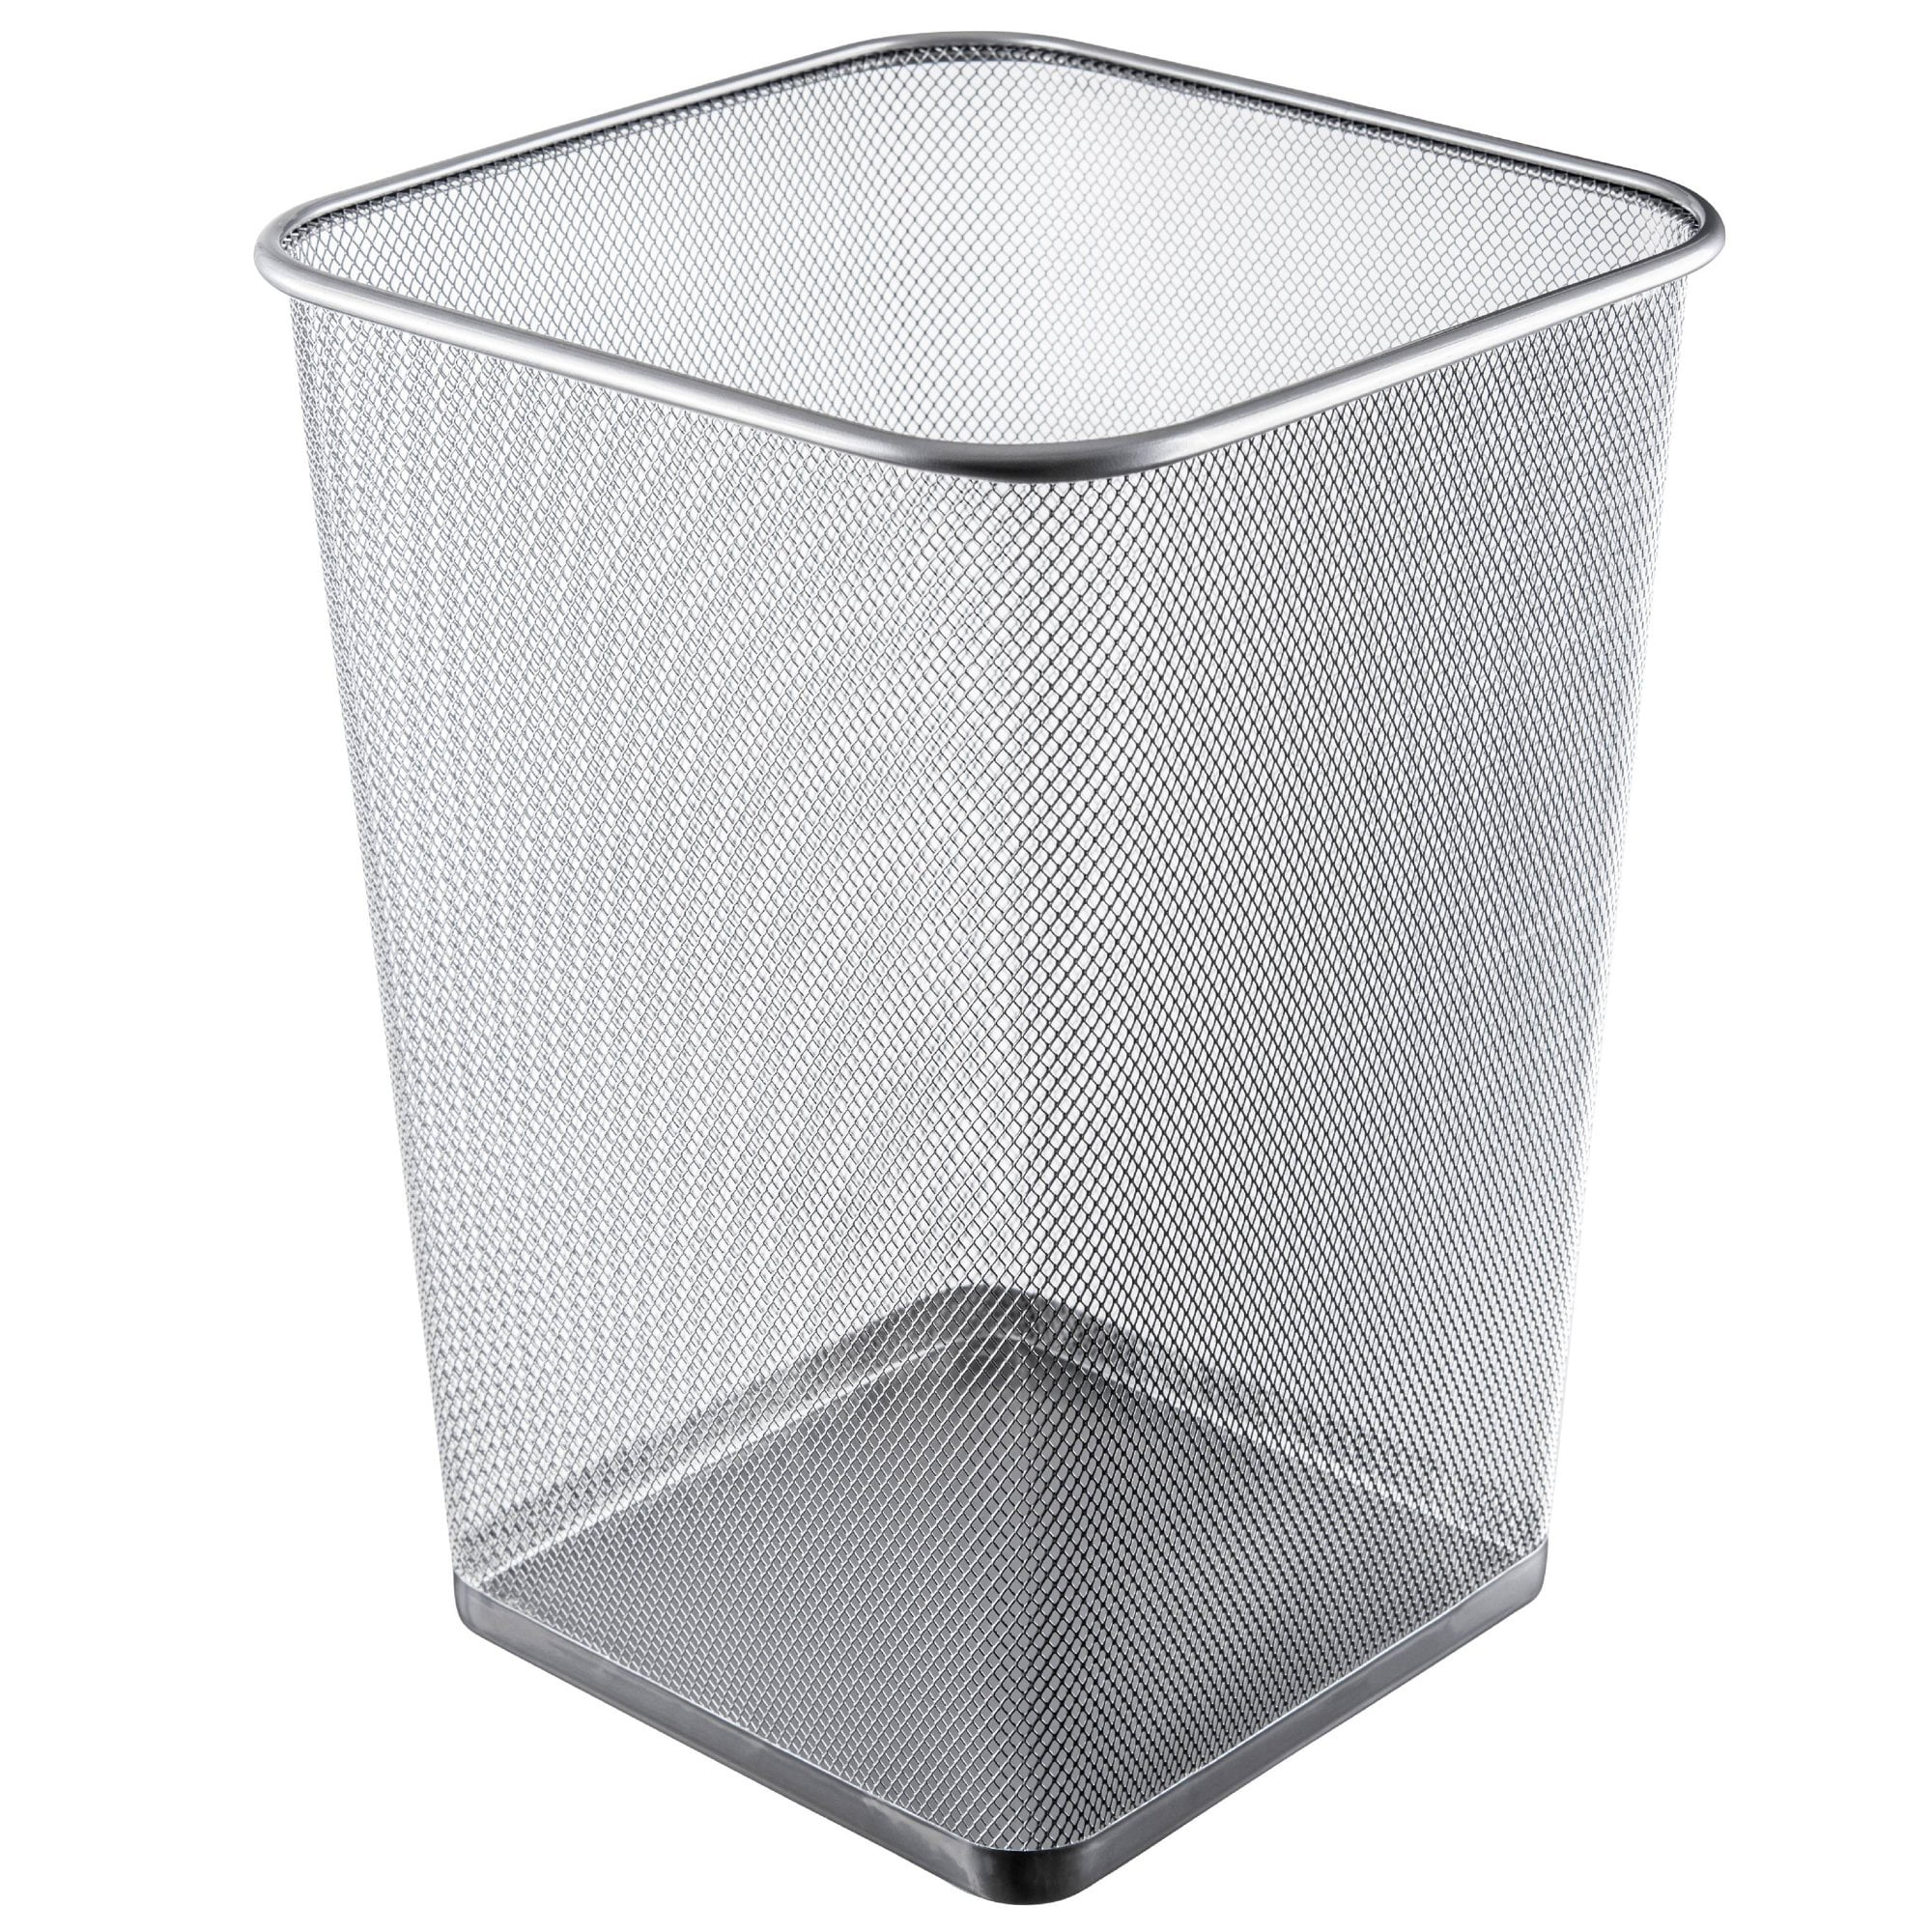 Mesh Wastebasket Trash Can Square 6 Gallon Silver 2 Pack Cleaning Supplies New 